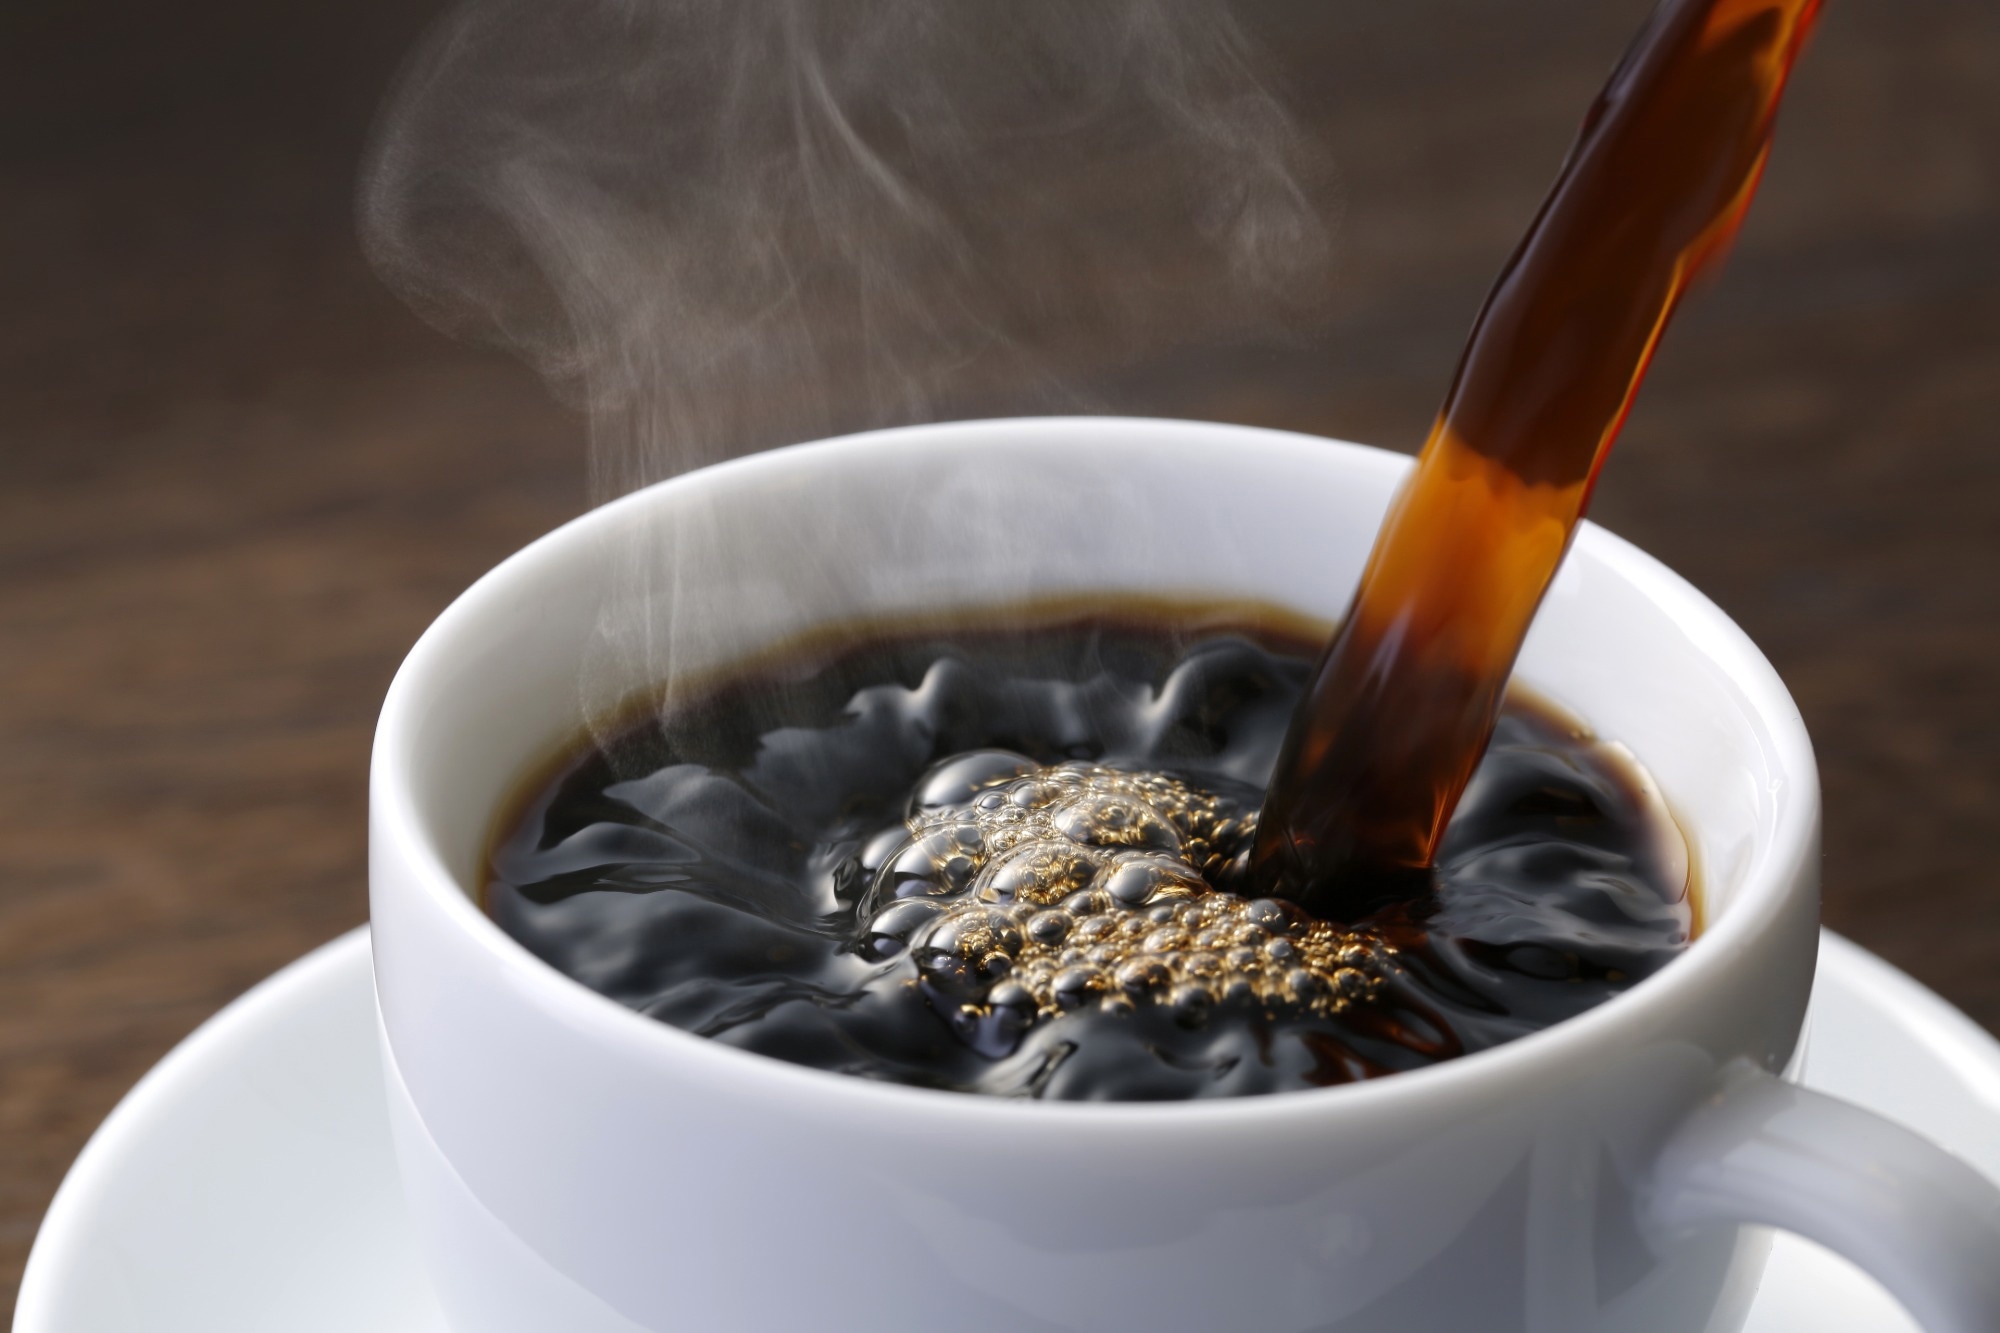 Study: Coffee consumption and abdominal aortic calcification among adults with and without hypertension, diabetes, and cardiovascular diseases. Image Credit: NOBUHIROASADA/Shutterstock.com